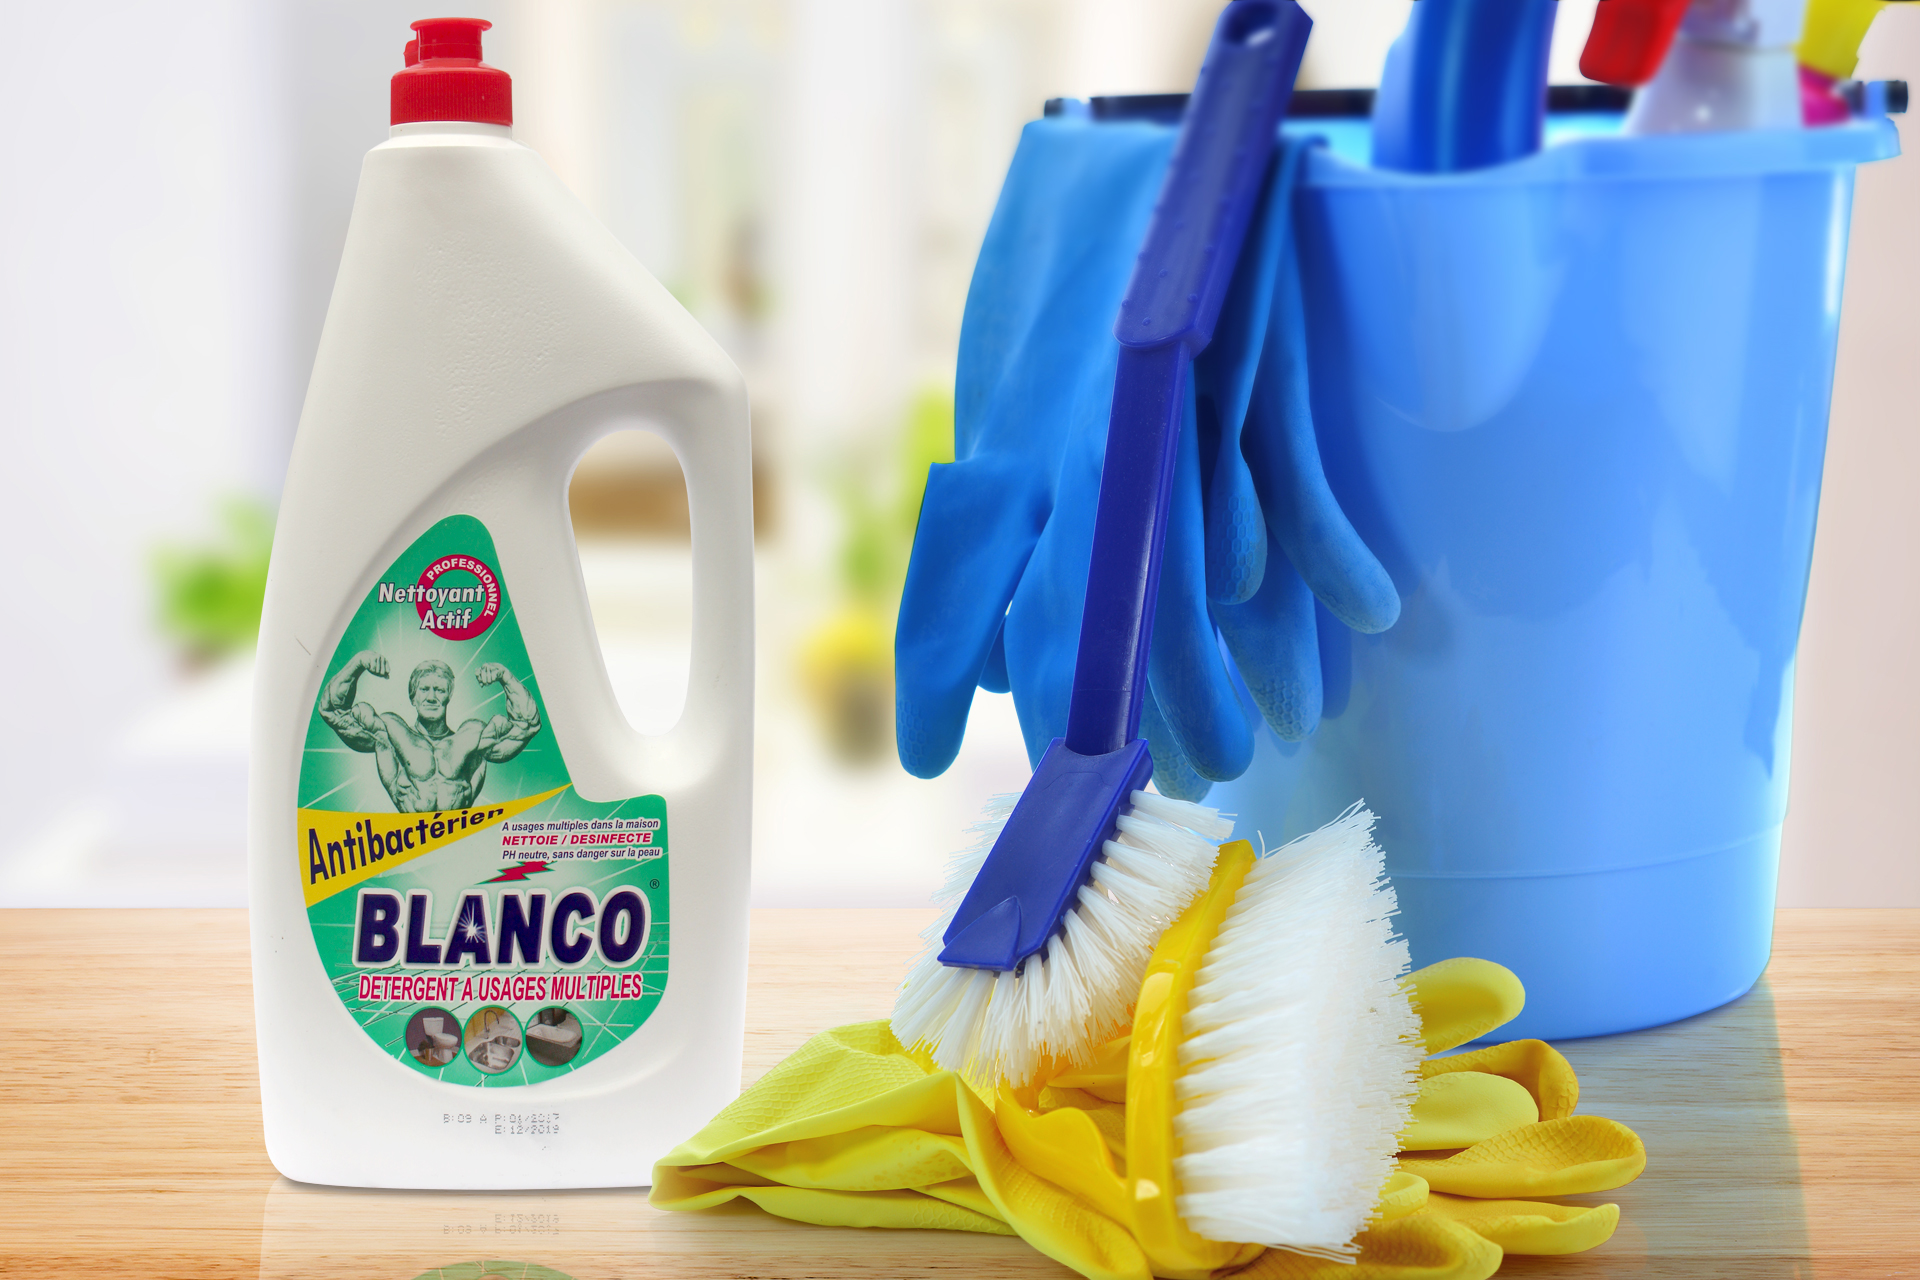 https://orbitsarl.com/wp-content/uploads/2017/08/Product-Cleaning_Blanco-Detergent-1L_1920x1280-FIN.jpg